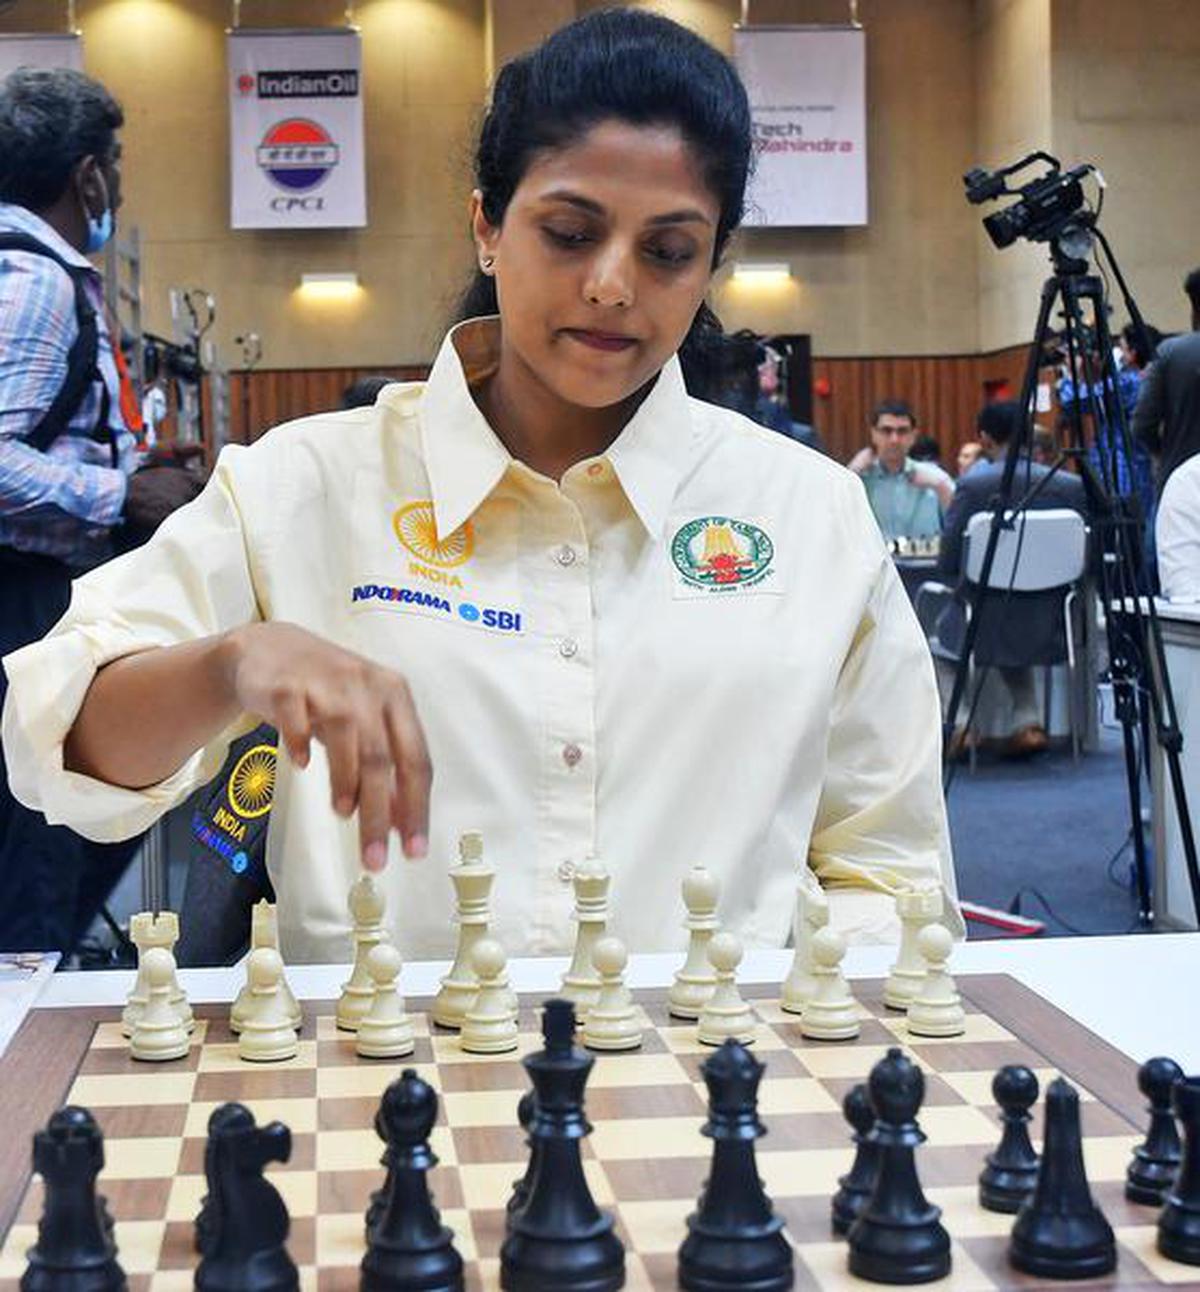 GM Harika Dronavalli from the India A team playing on day 5 of the 44th Chess Olympiad held at Mamallapuram on August 2, 2022.